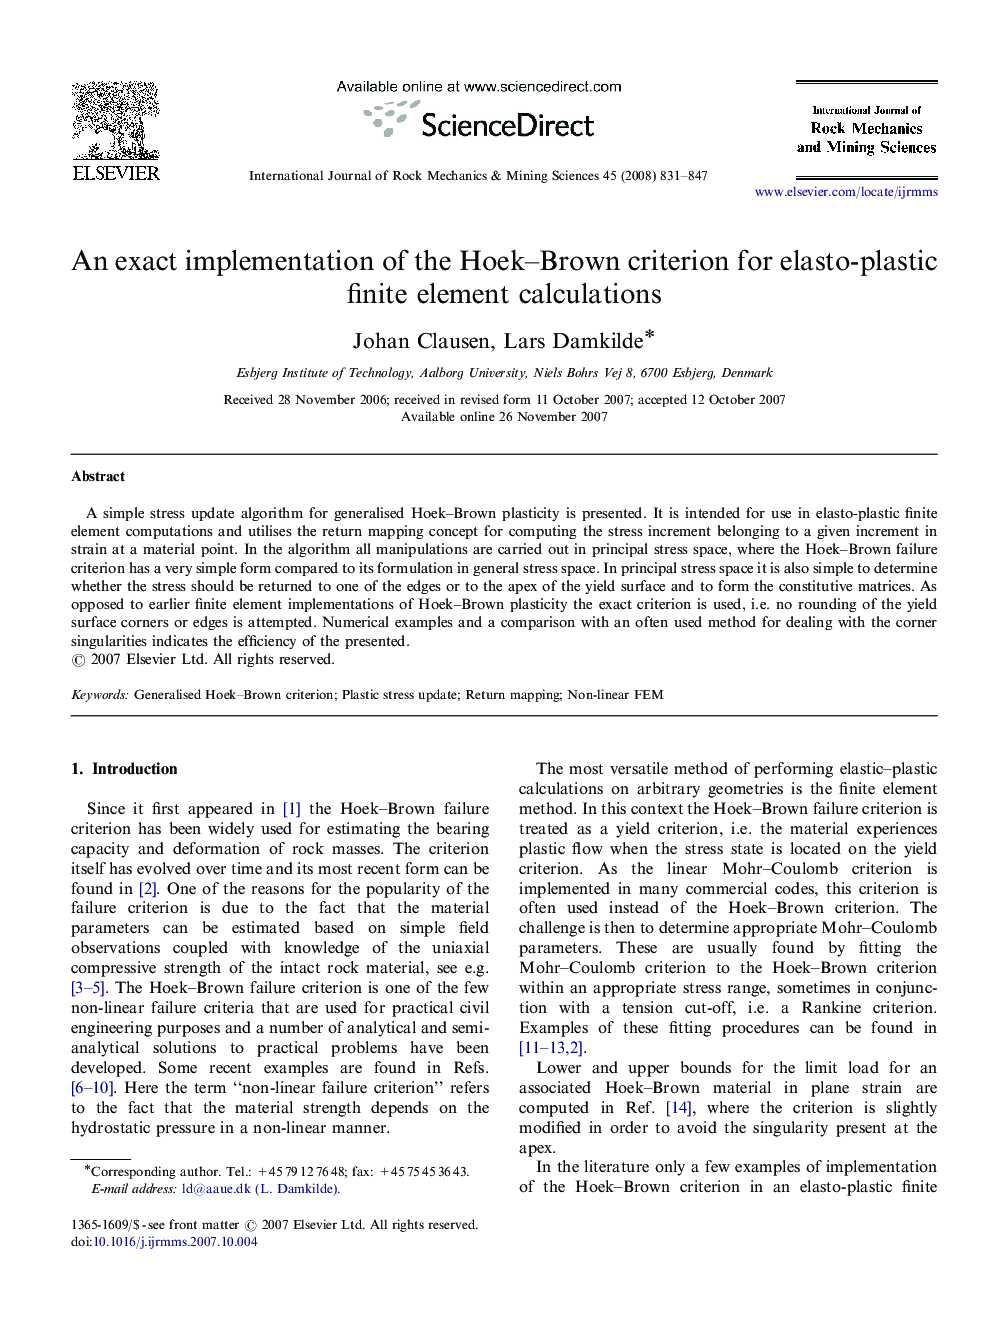 An exact implementation of the Hoek–Brown criterion for elasto-plastic finite element calculations